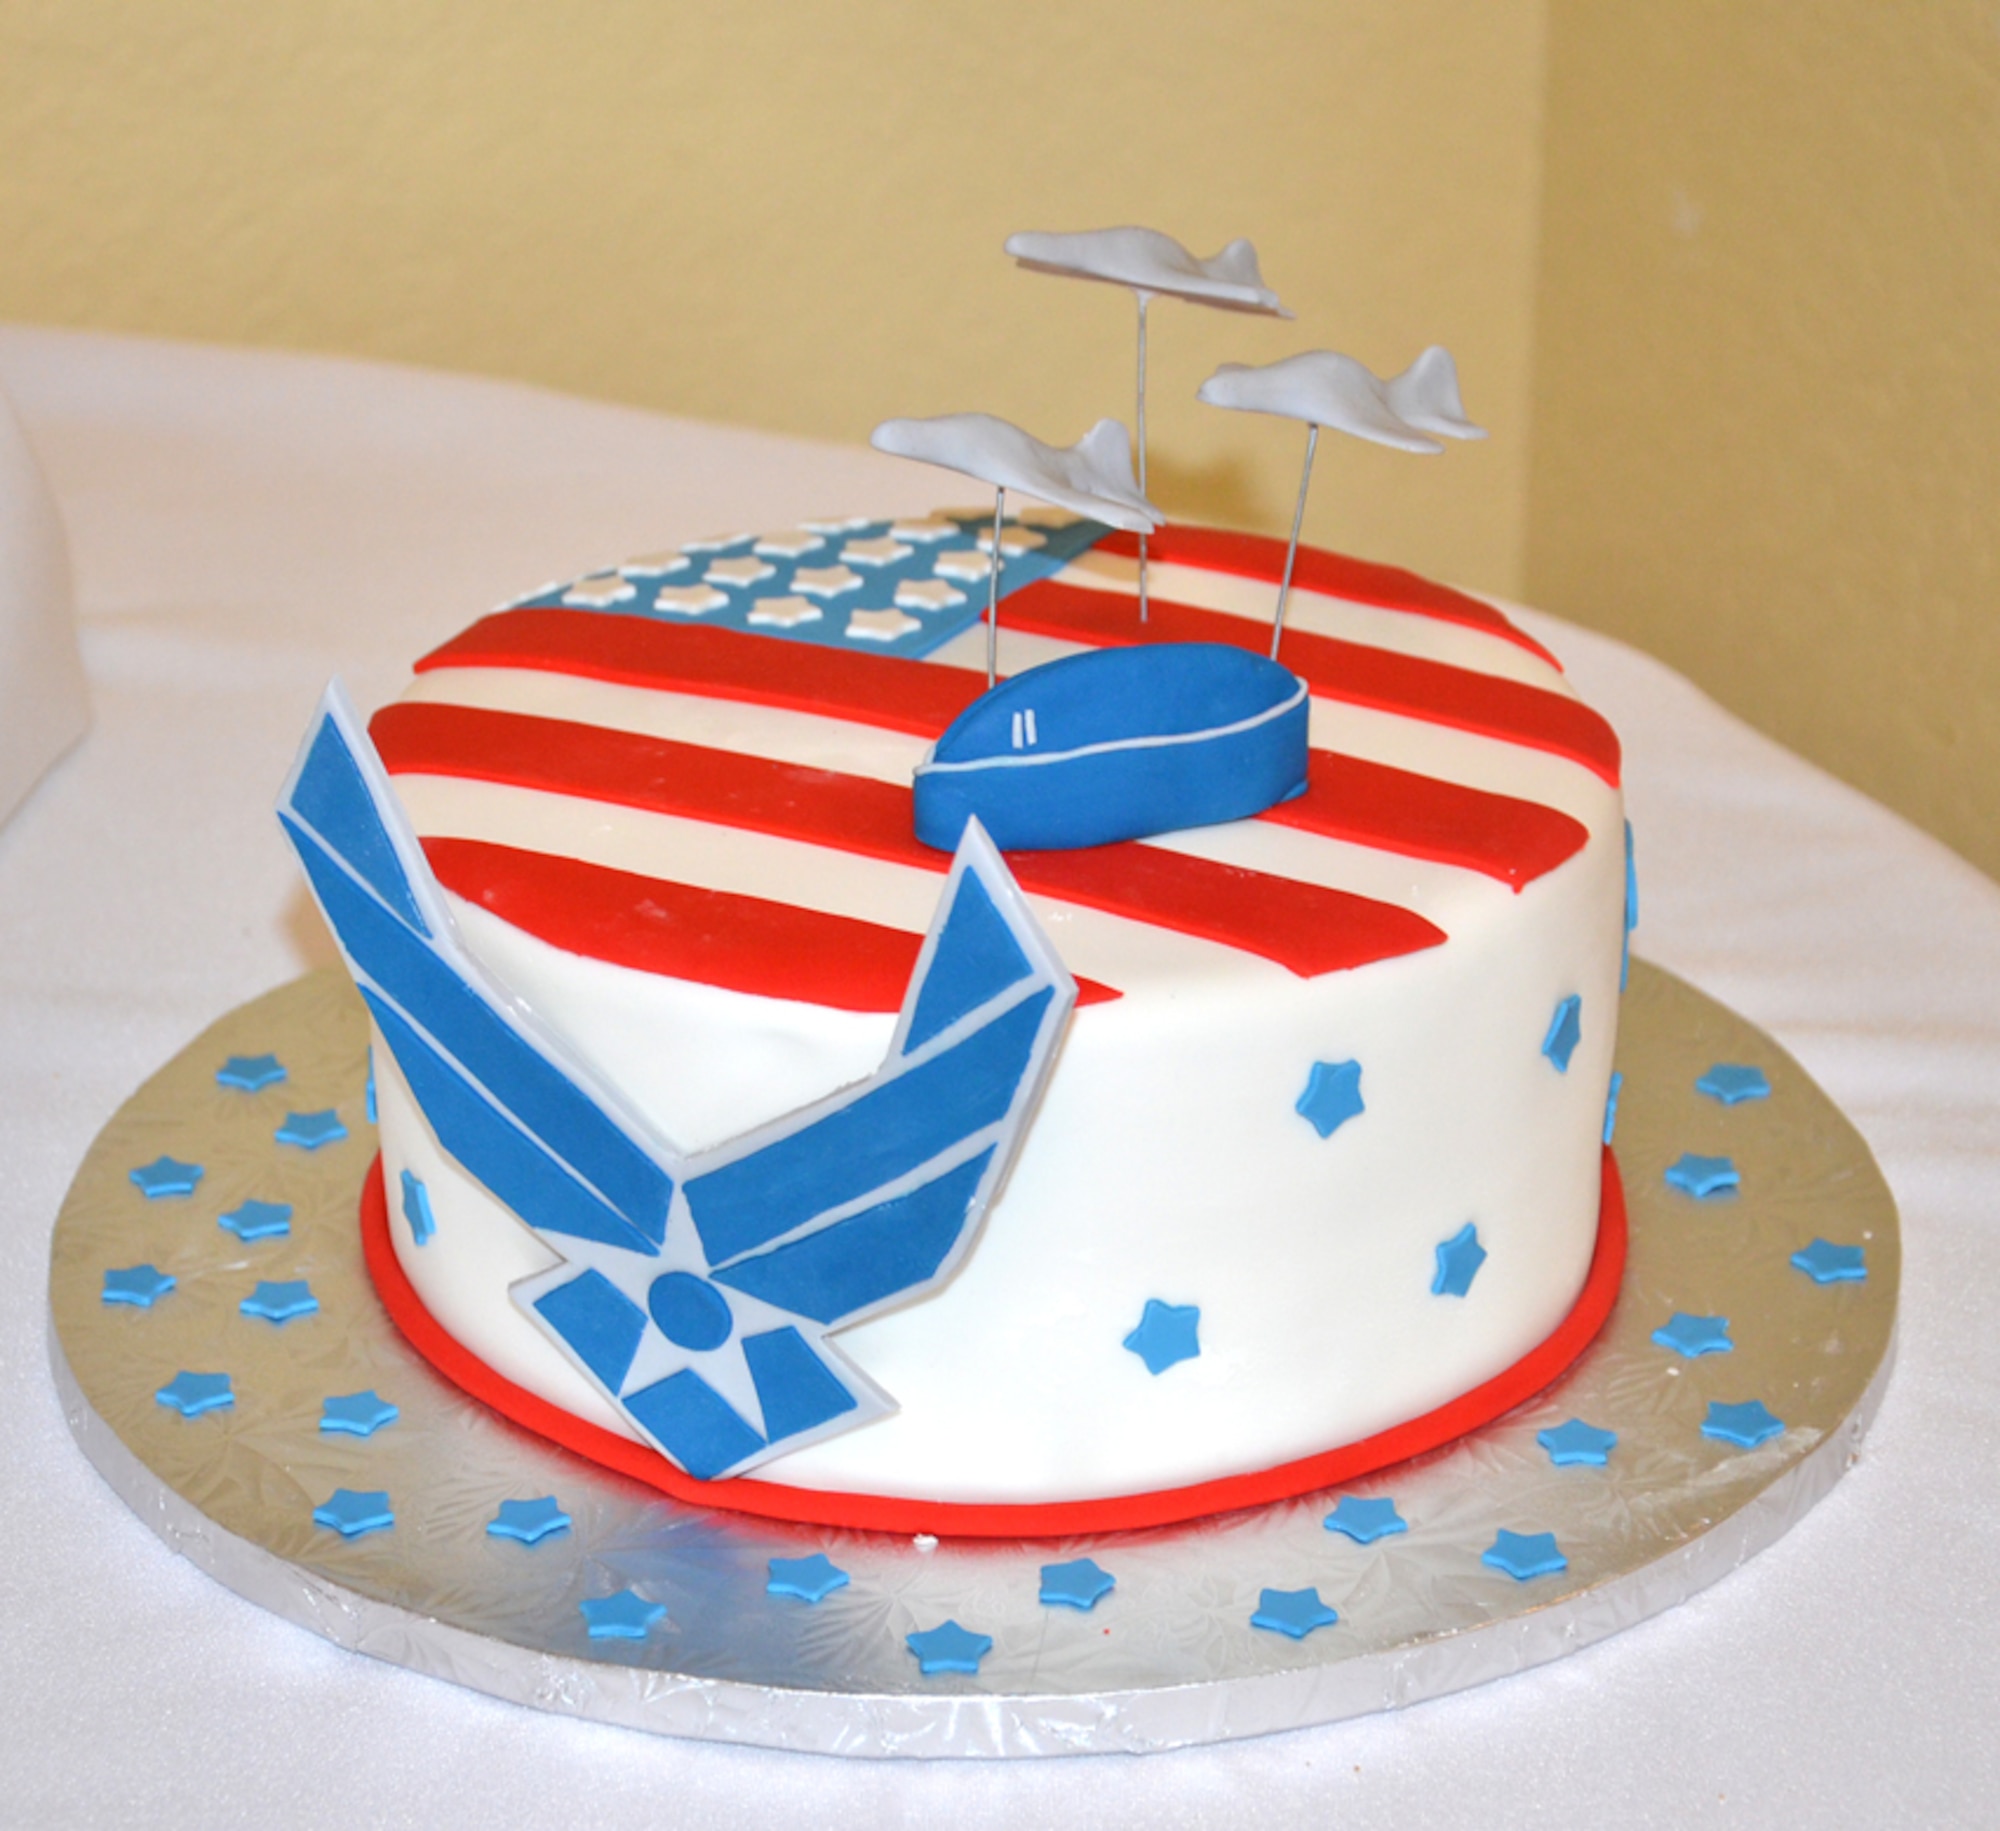 Capt. Paul Hayes, 920th Rescue Wing military equal opportunity officer, received a special groom cake in addition to a free wedding with all the flourishes when he married his fiance Aleshia Panbamrung at a nearby beachfront hotel on Leap Day Feb. 29. The wedding cost the couple nothing because nineteen local vendors sponsored their wedding as part of the launch of new destinations wedding web site launch. (U.S. Air Force photo/Capt. Cathleen Snow)